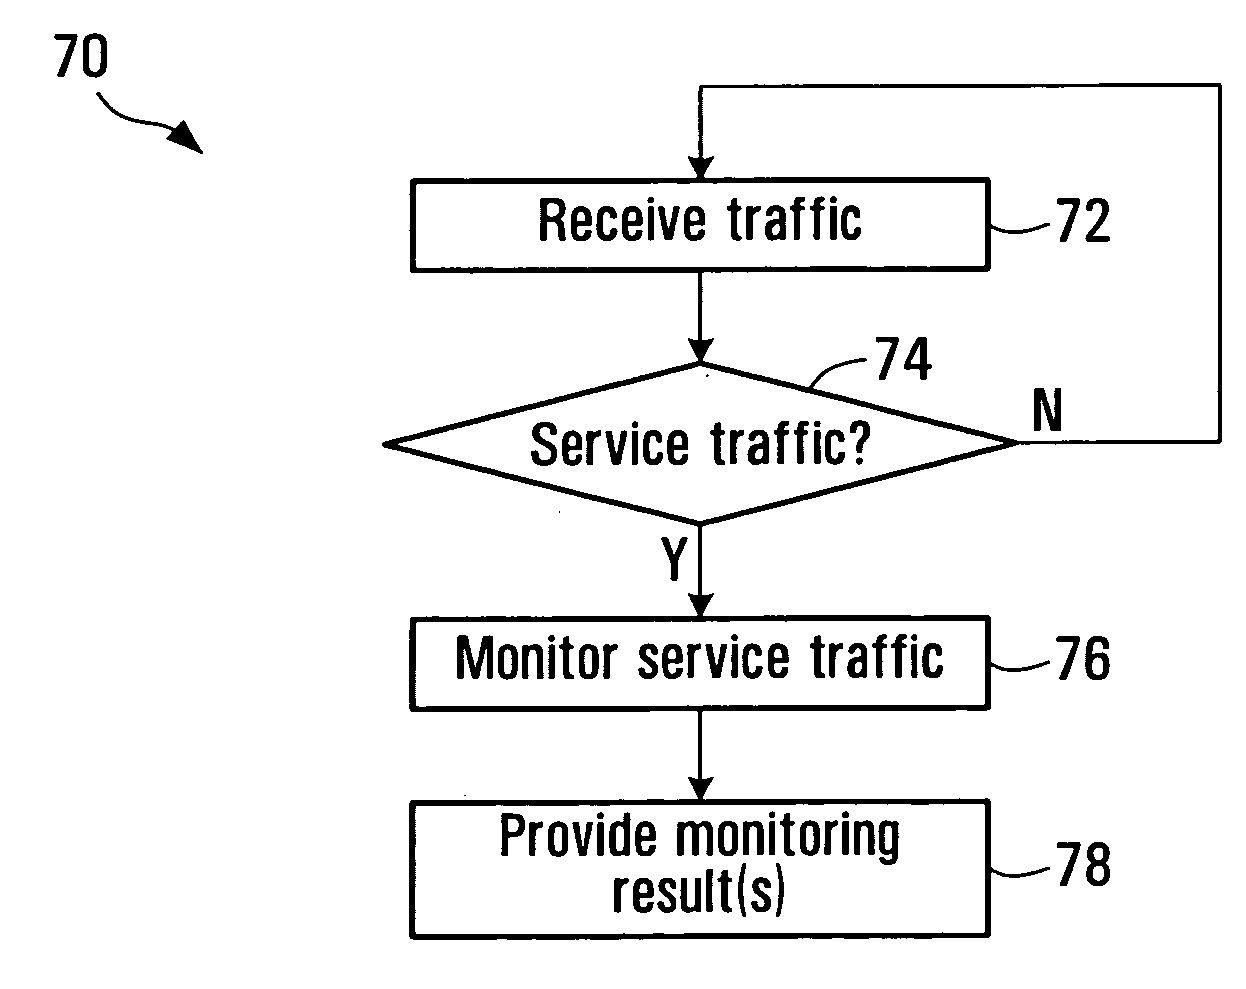 Service-centric communication network monitoring